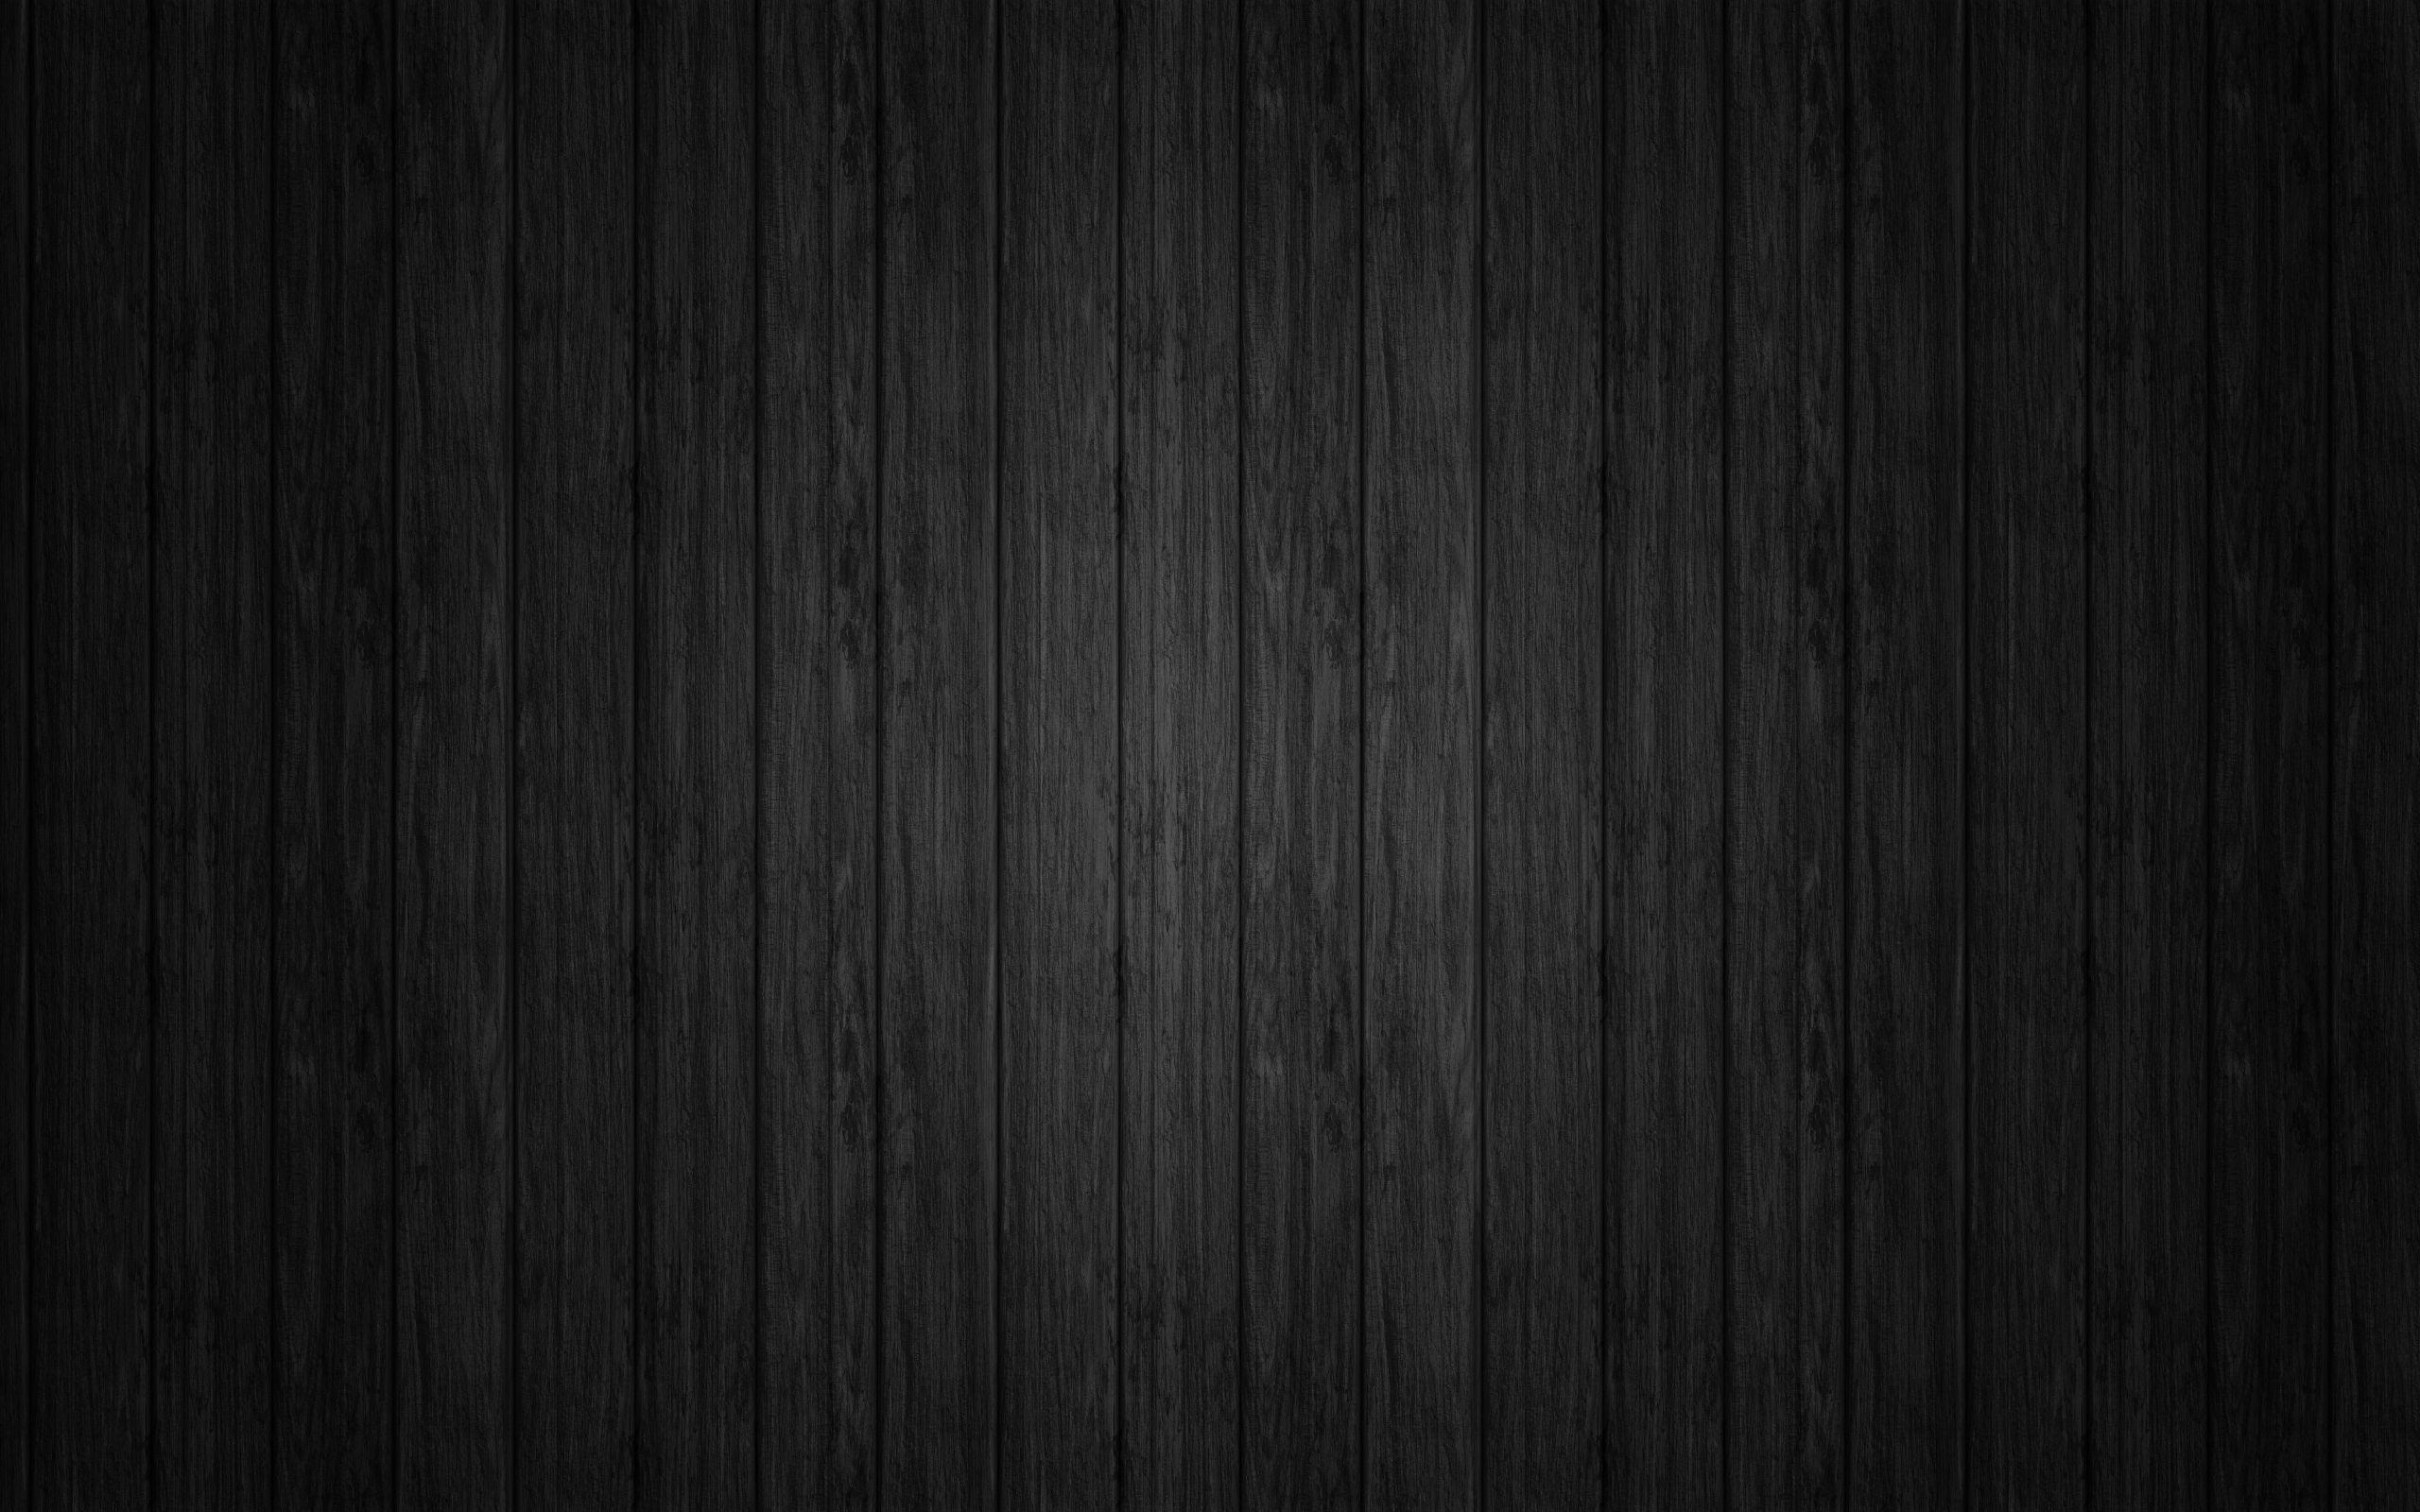 Plain Black Wallpaper. Large HD Wallpaper Database. Projects to